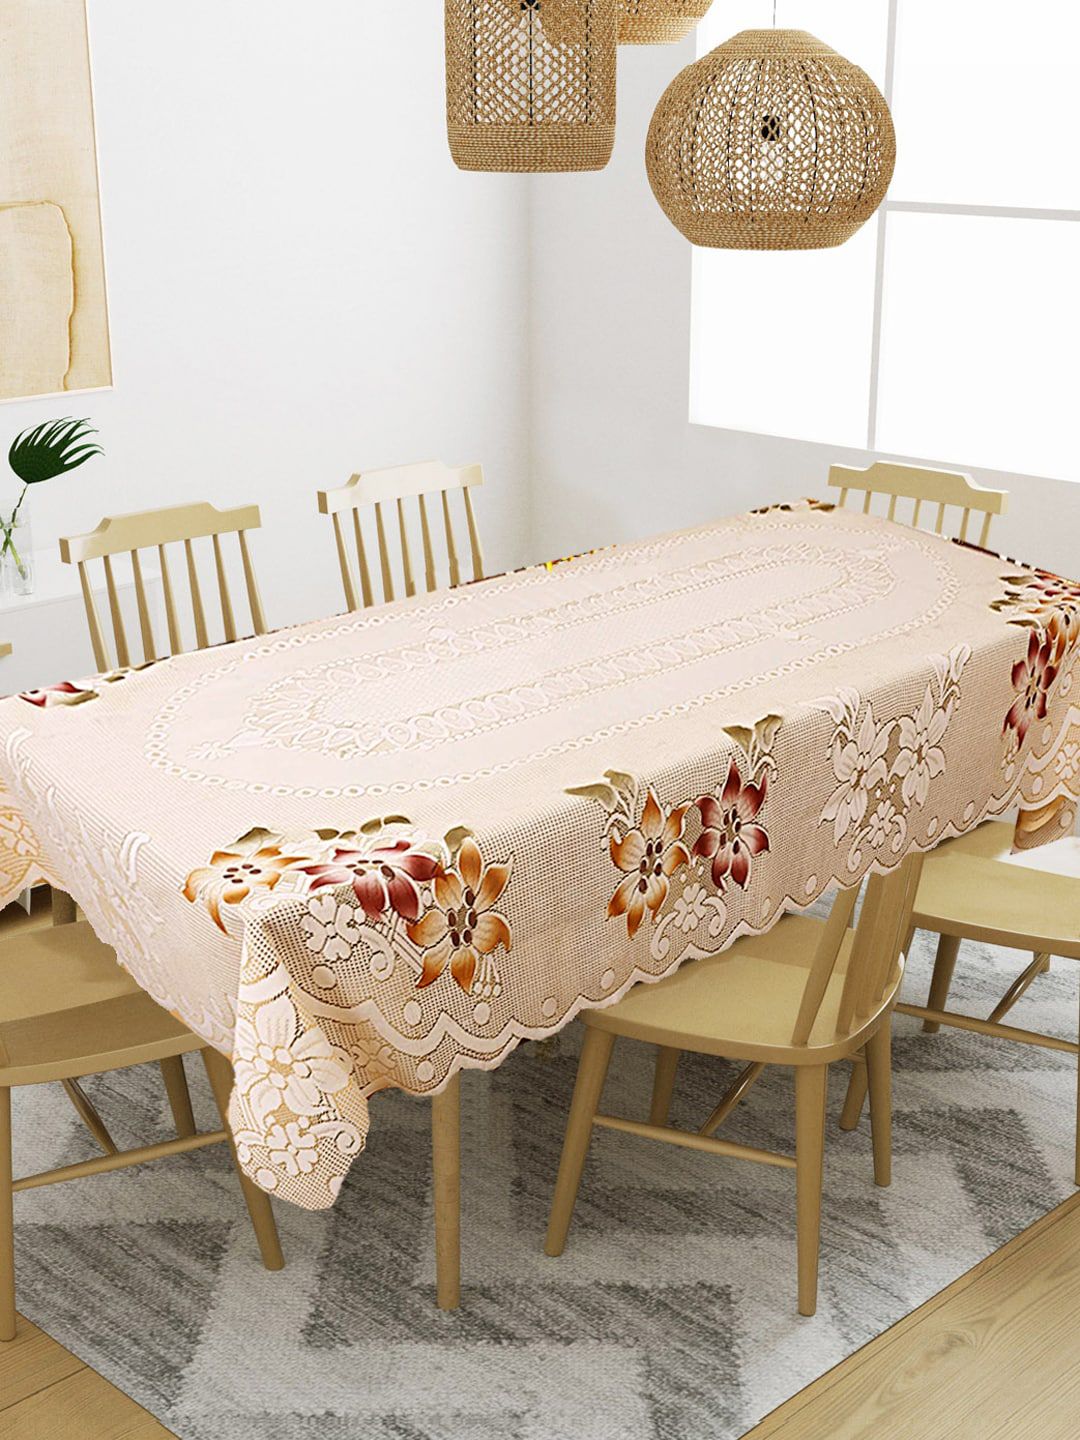 WEAVERS VILLA Cream Printed 6 Seater Cotton Table Covers Price in India